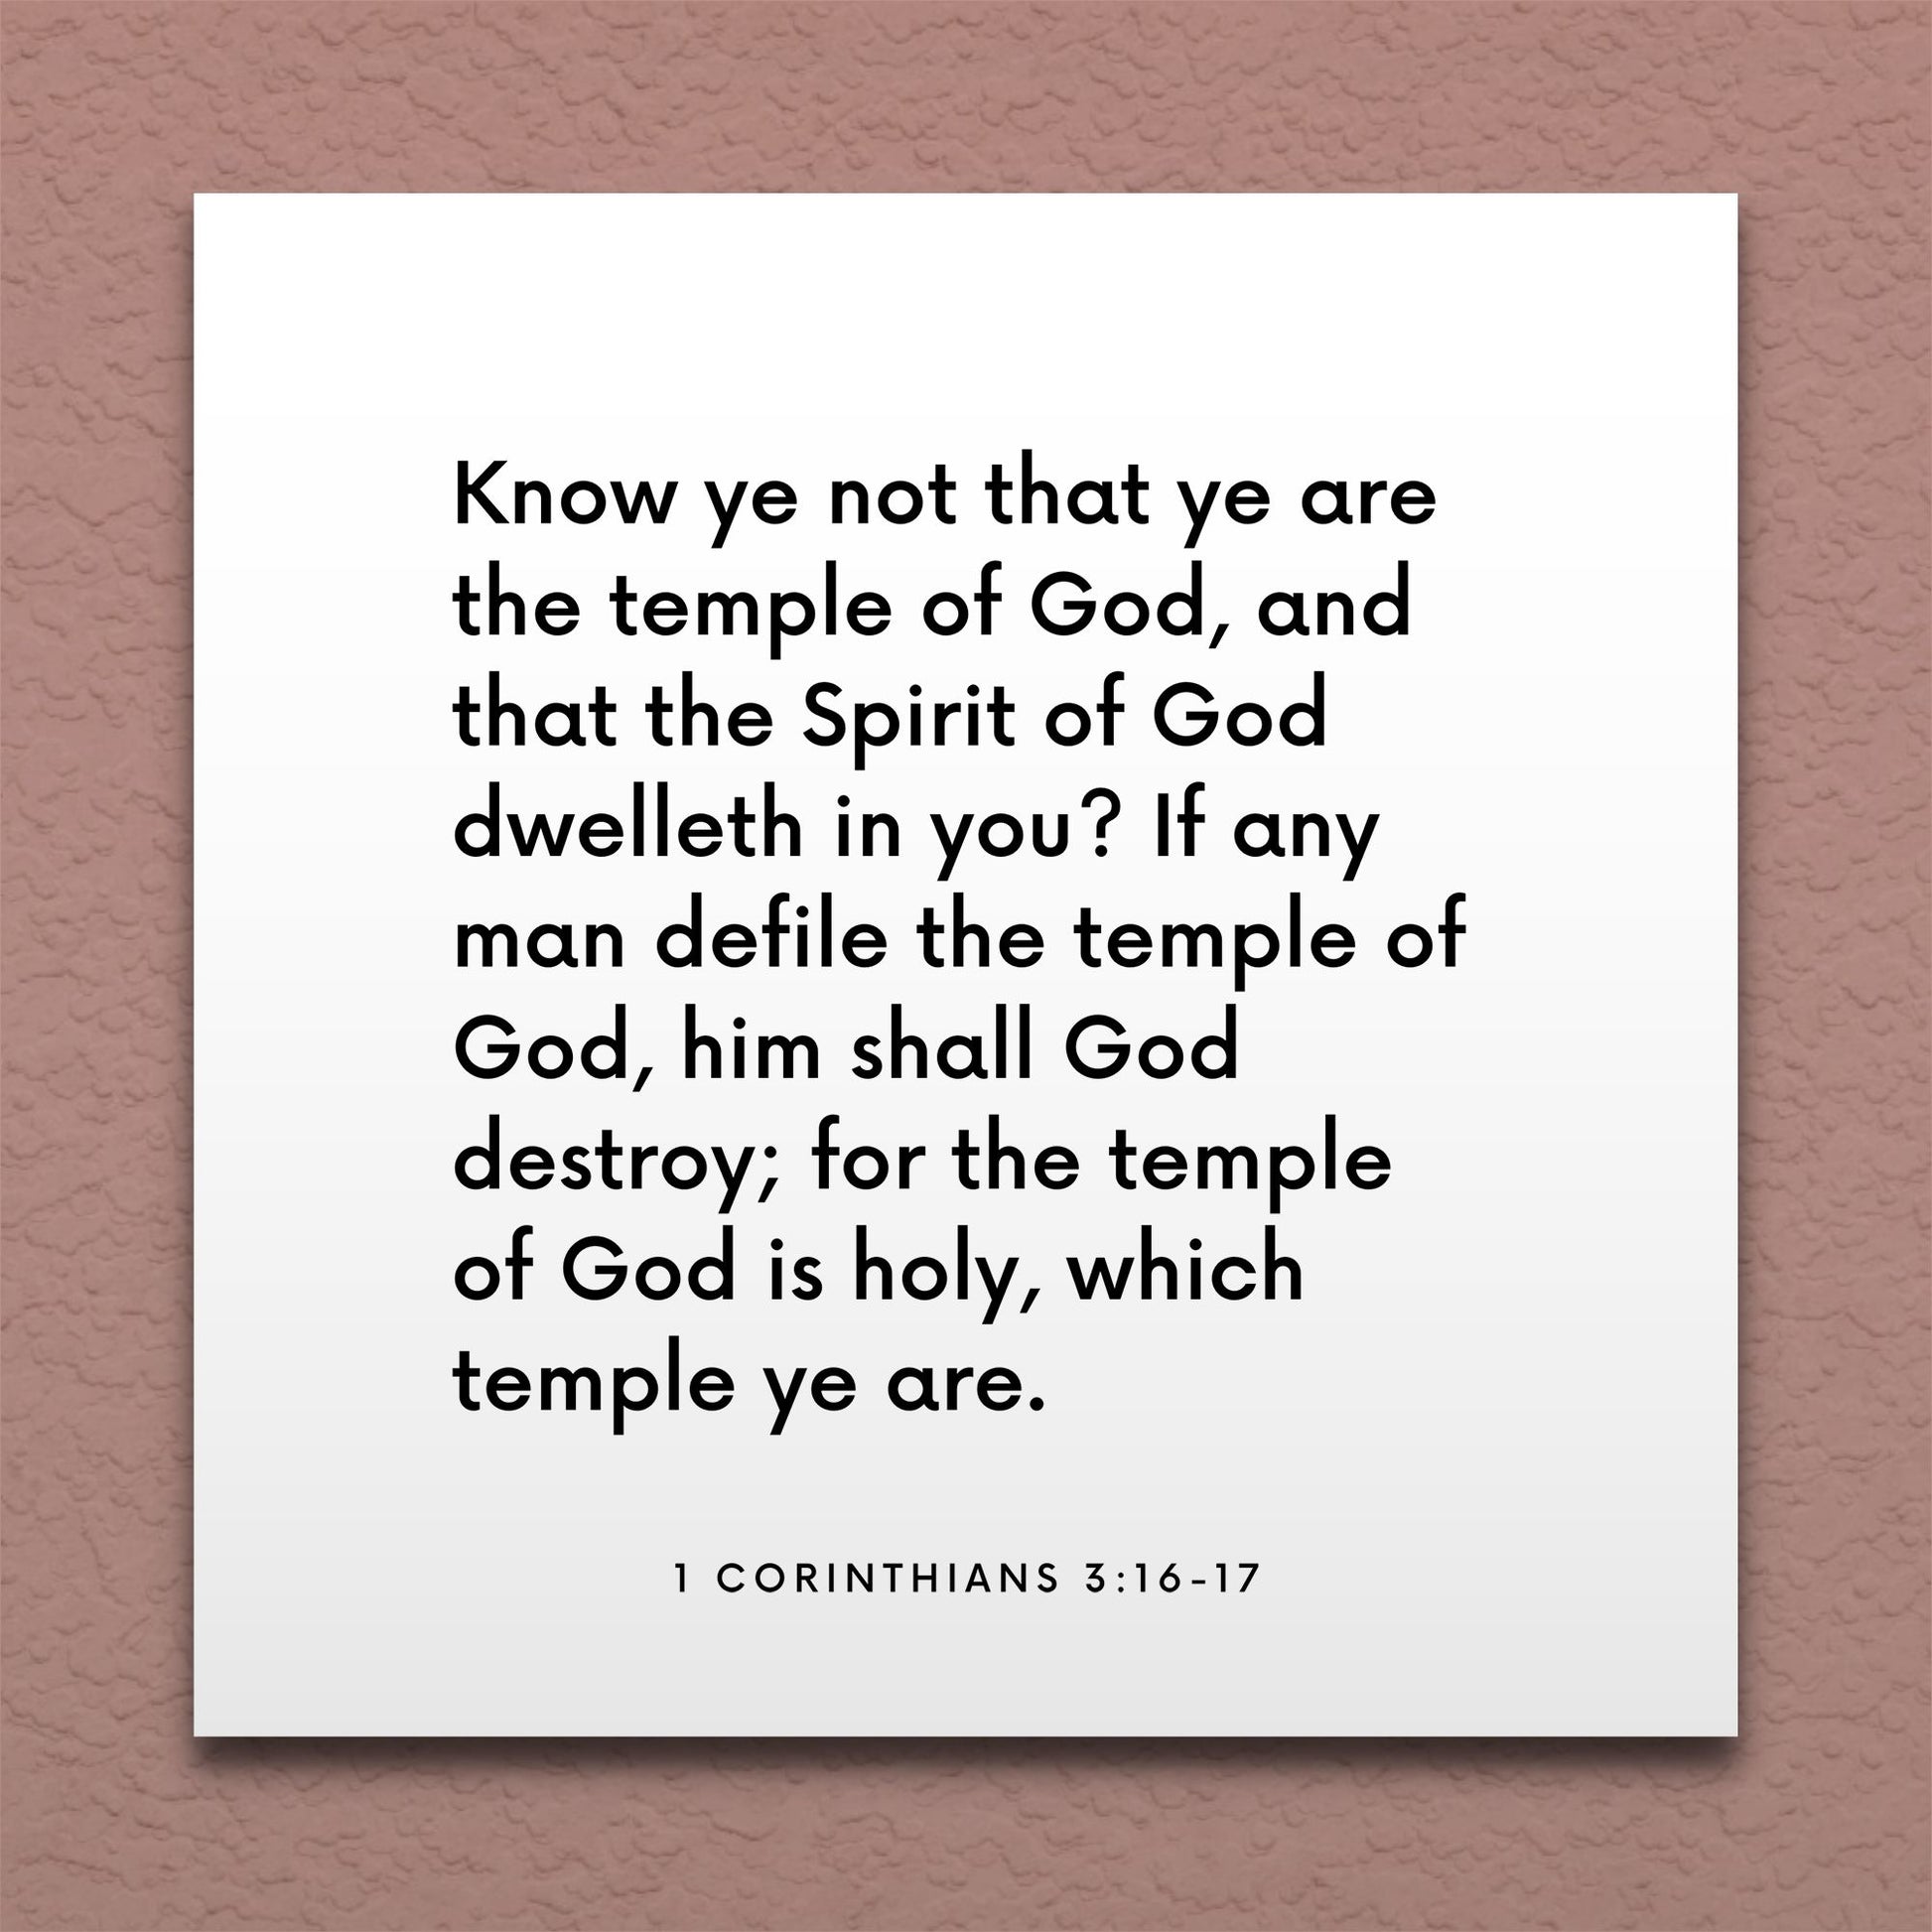 Wall-mounted scripture tile for 1 Corinthians 3:16-17 - "Know ye not that ye are the temple of God?"